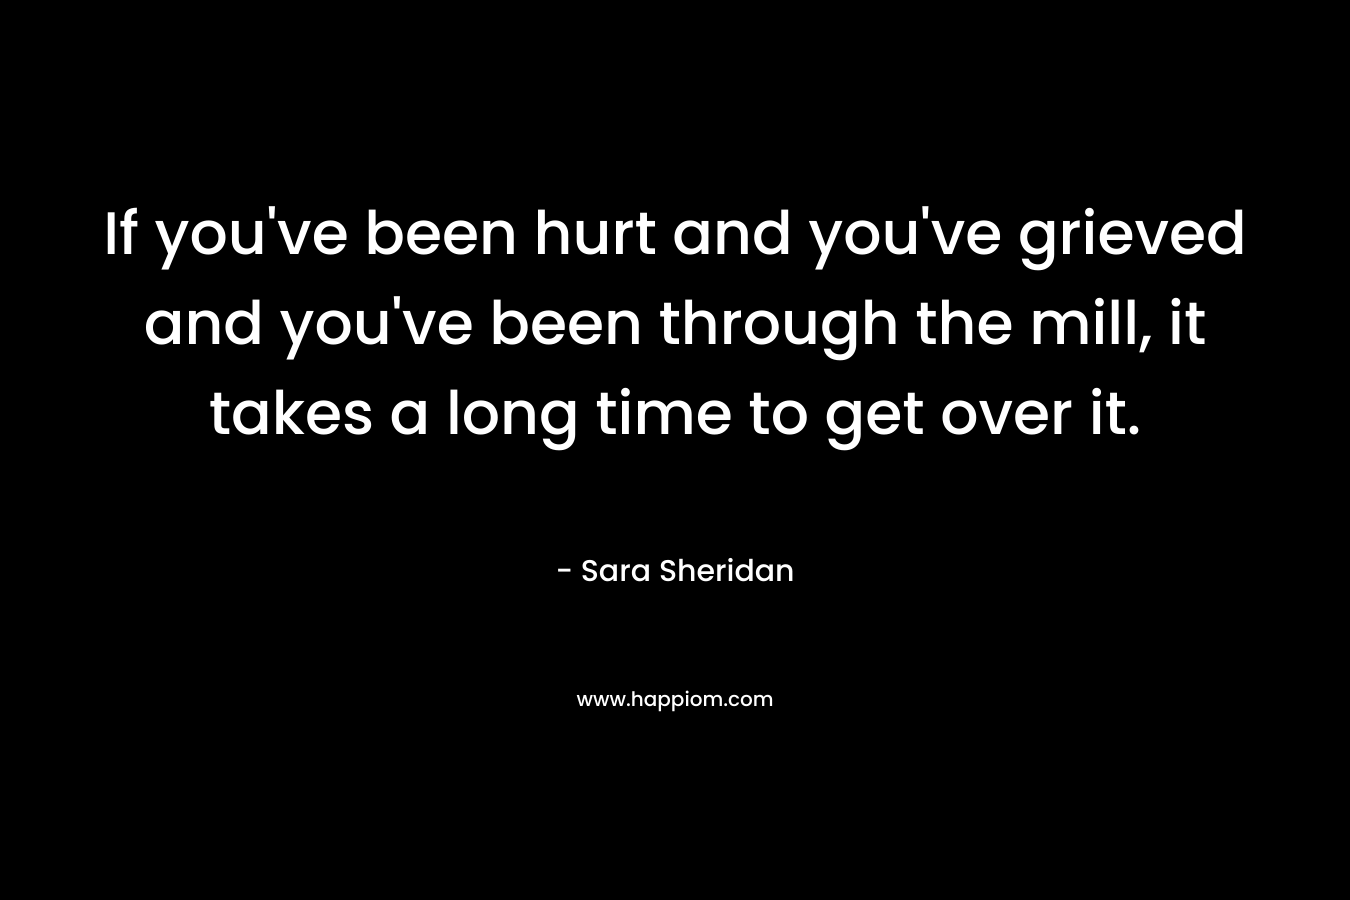 If you’ve been hurt and you’ve grieved and you’ve been through the mill, it takes a long time to get over it. – Sara Sheridan